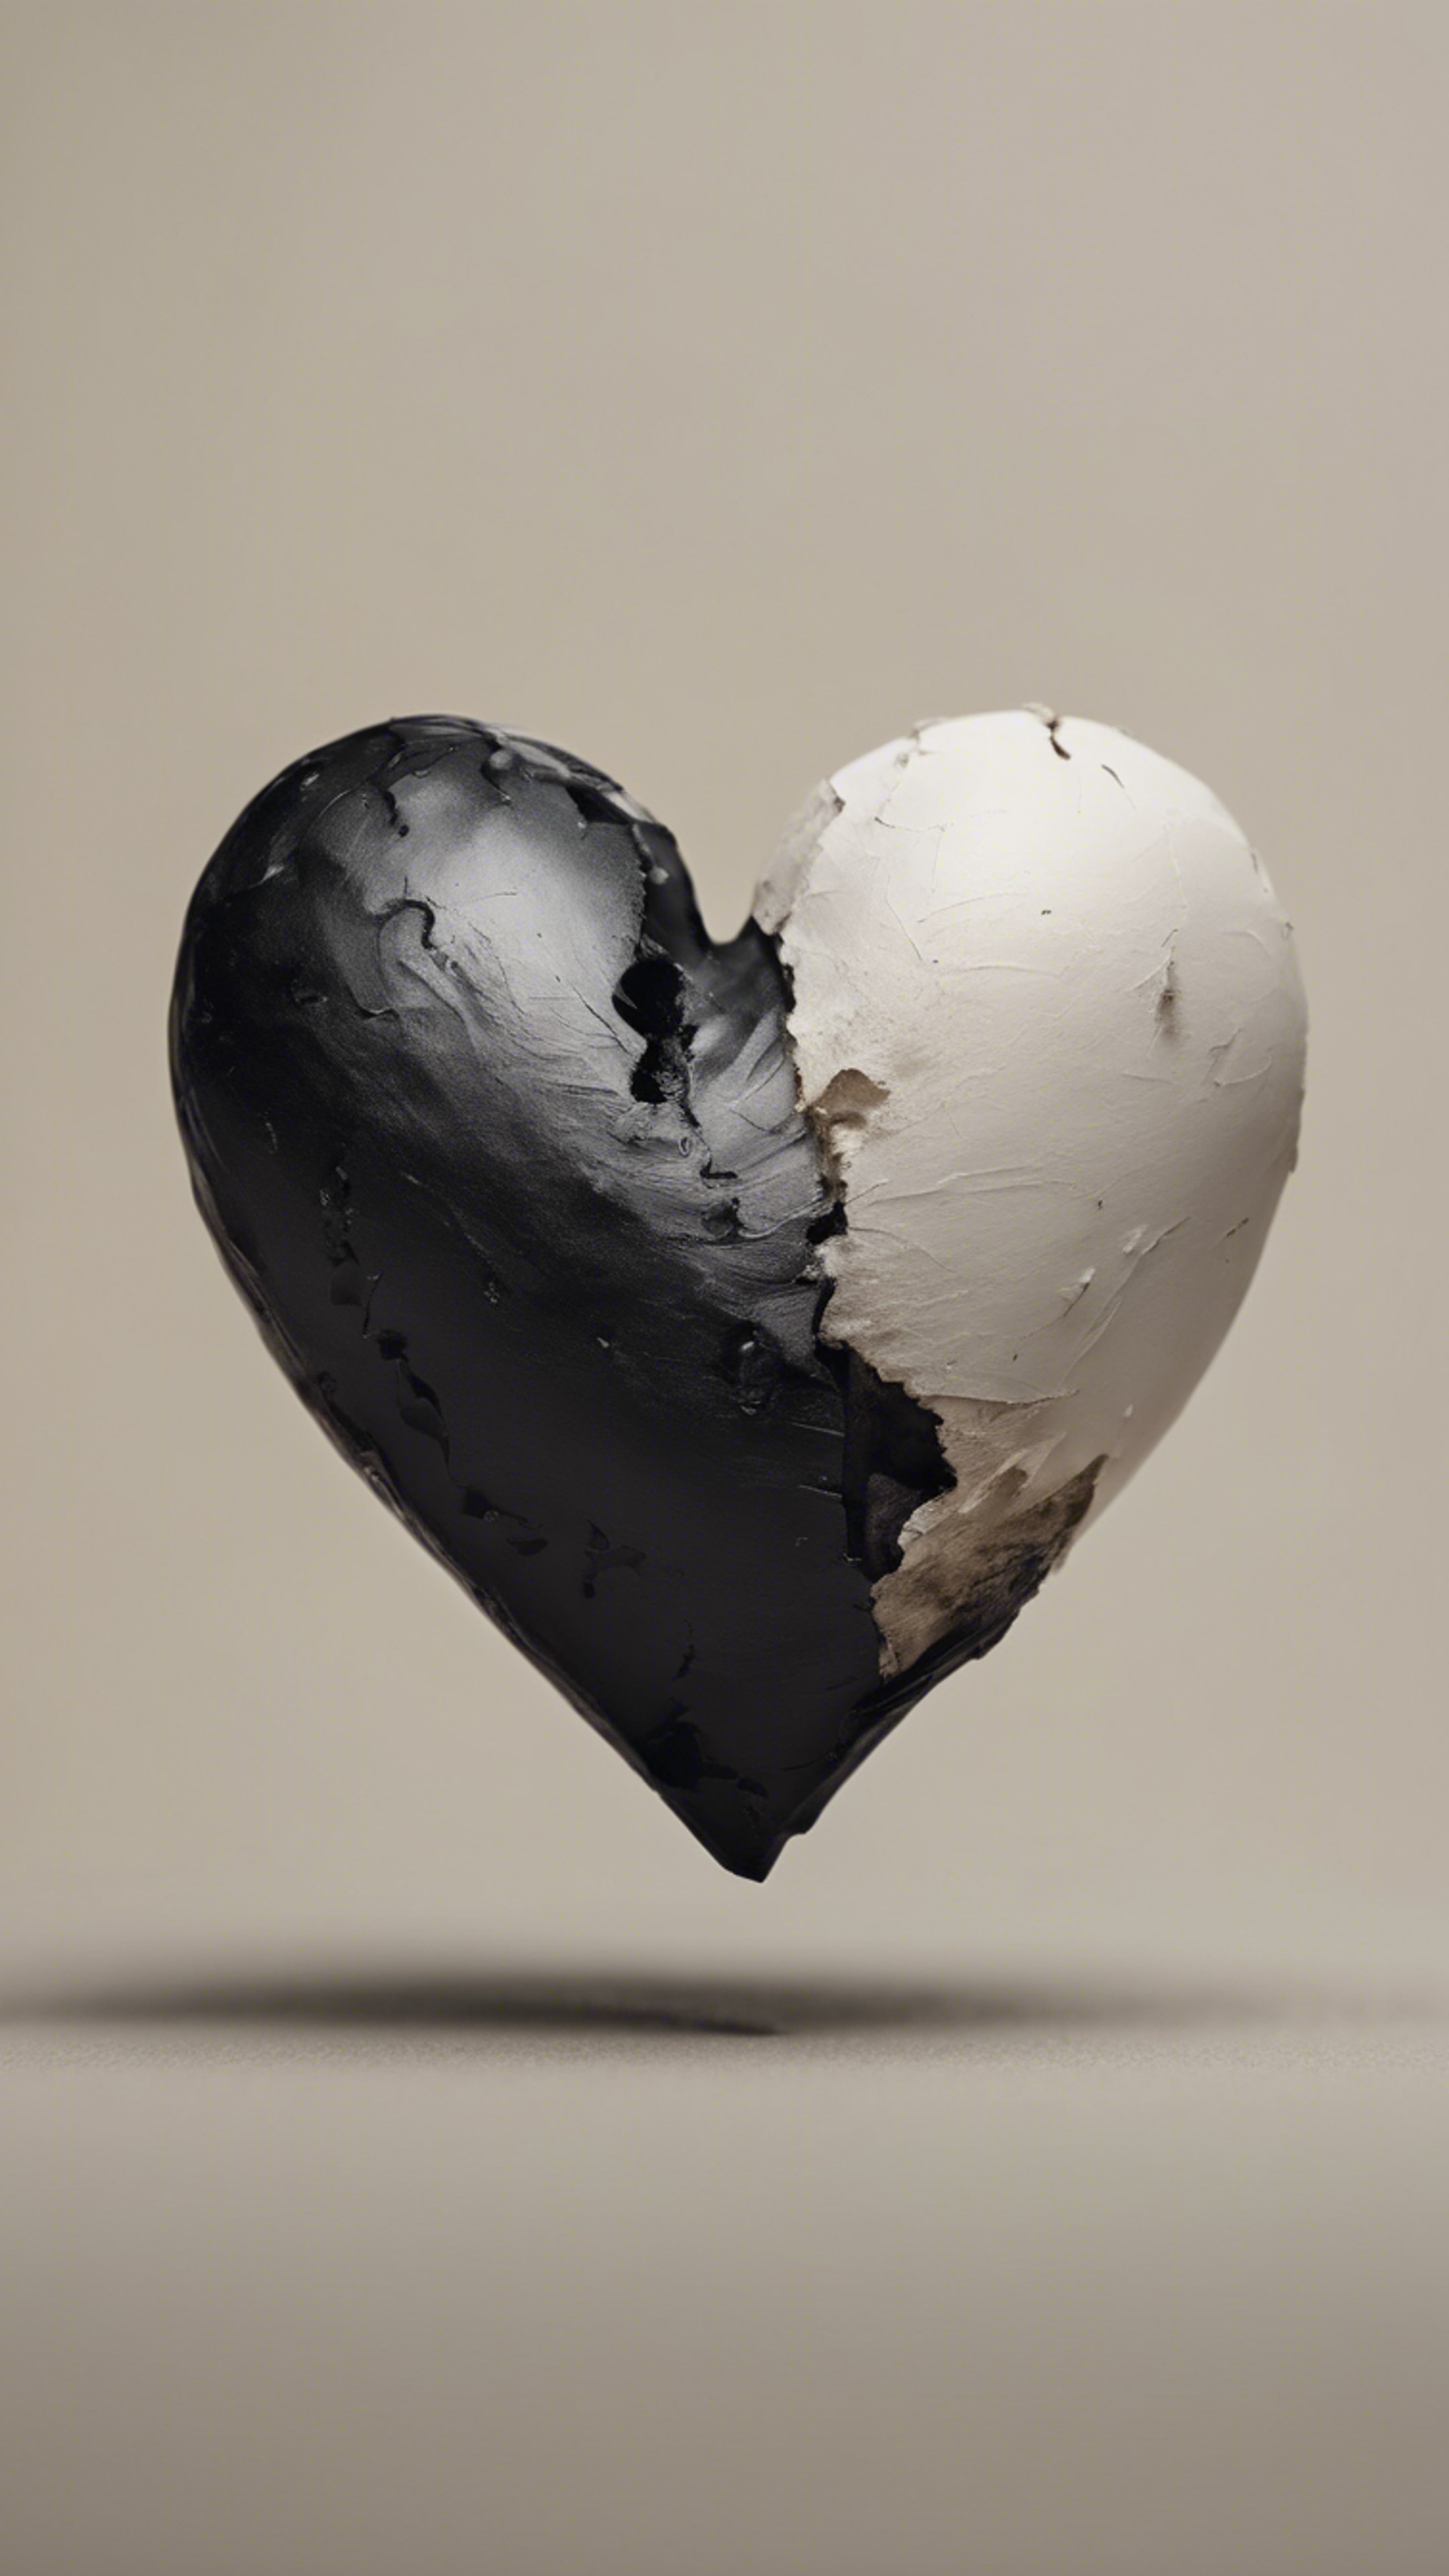 A black heart on one side and a white heart on the other side, against a neutral color background. Behang[e1ad96bec27b409fa1a8]